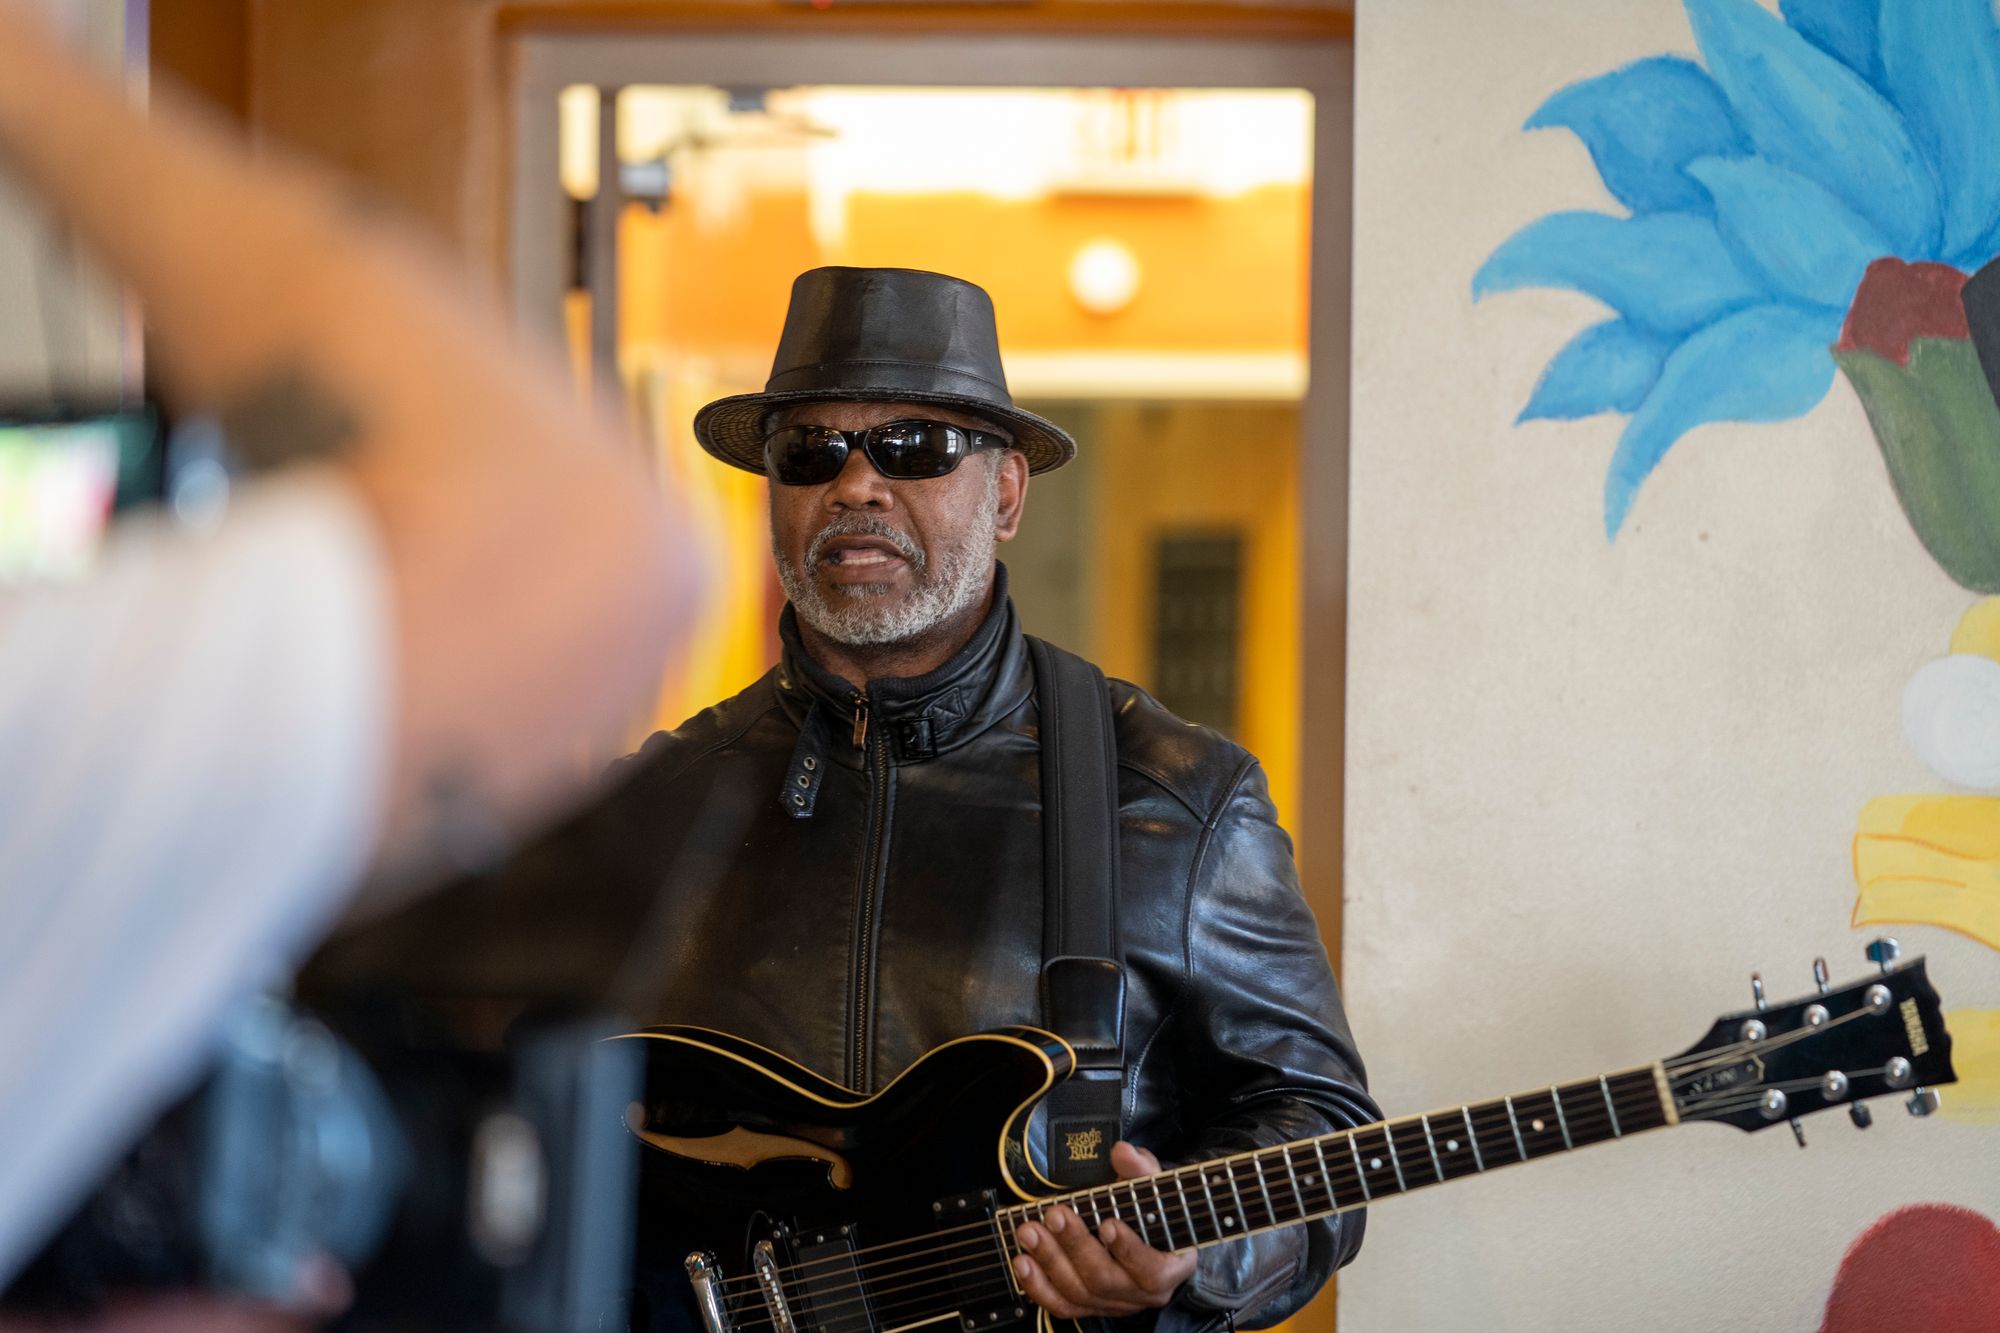 Image of a guitar player in a black leather jacket, sunglasses, and hat